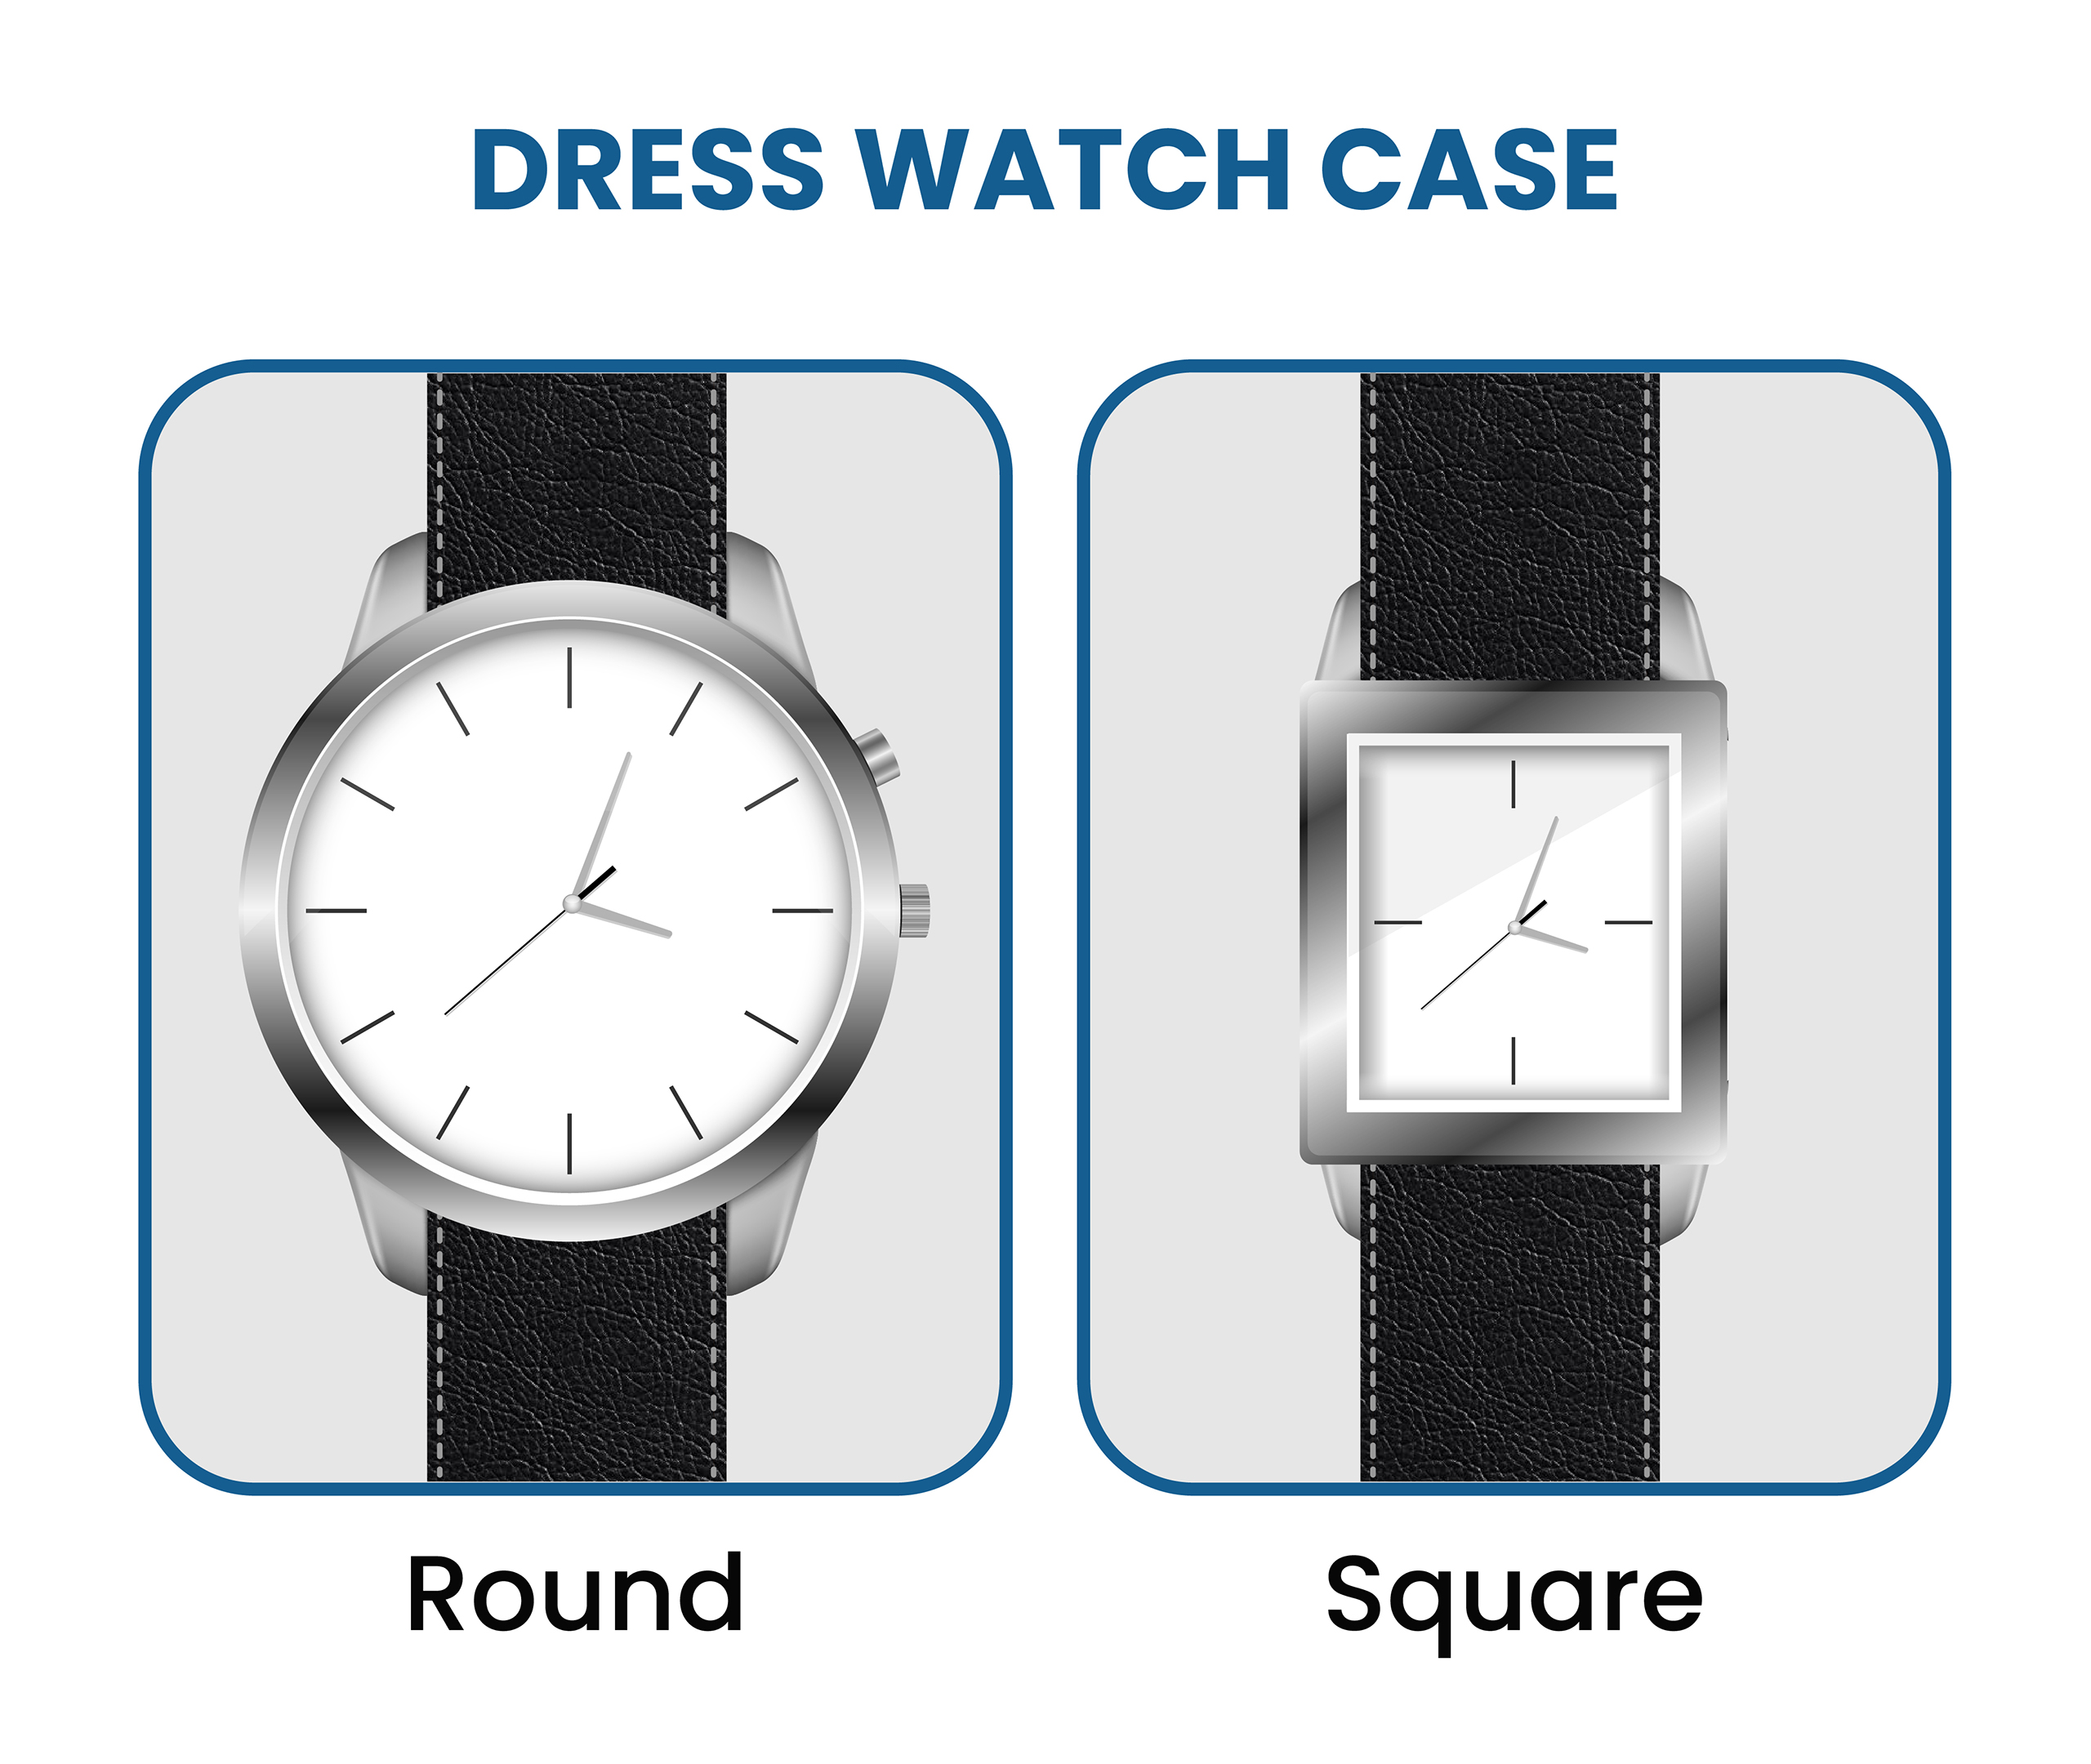 different types of watch case shape: round vs. square